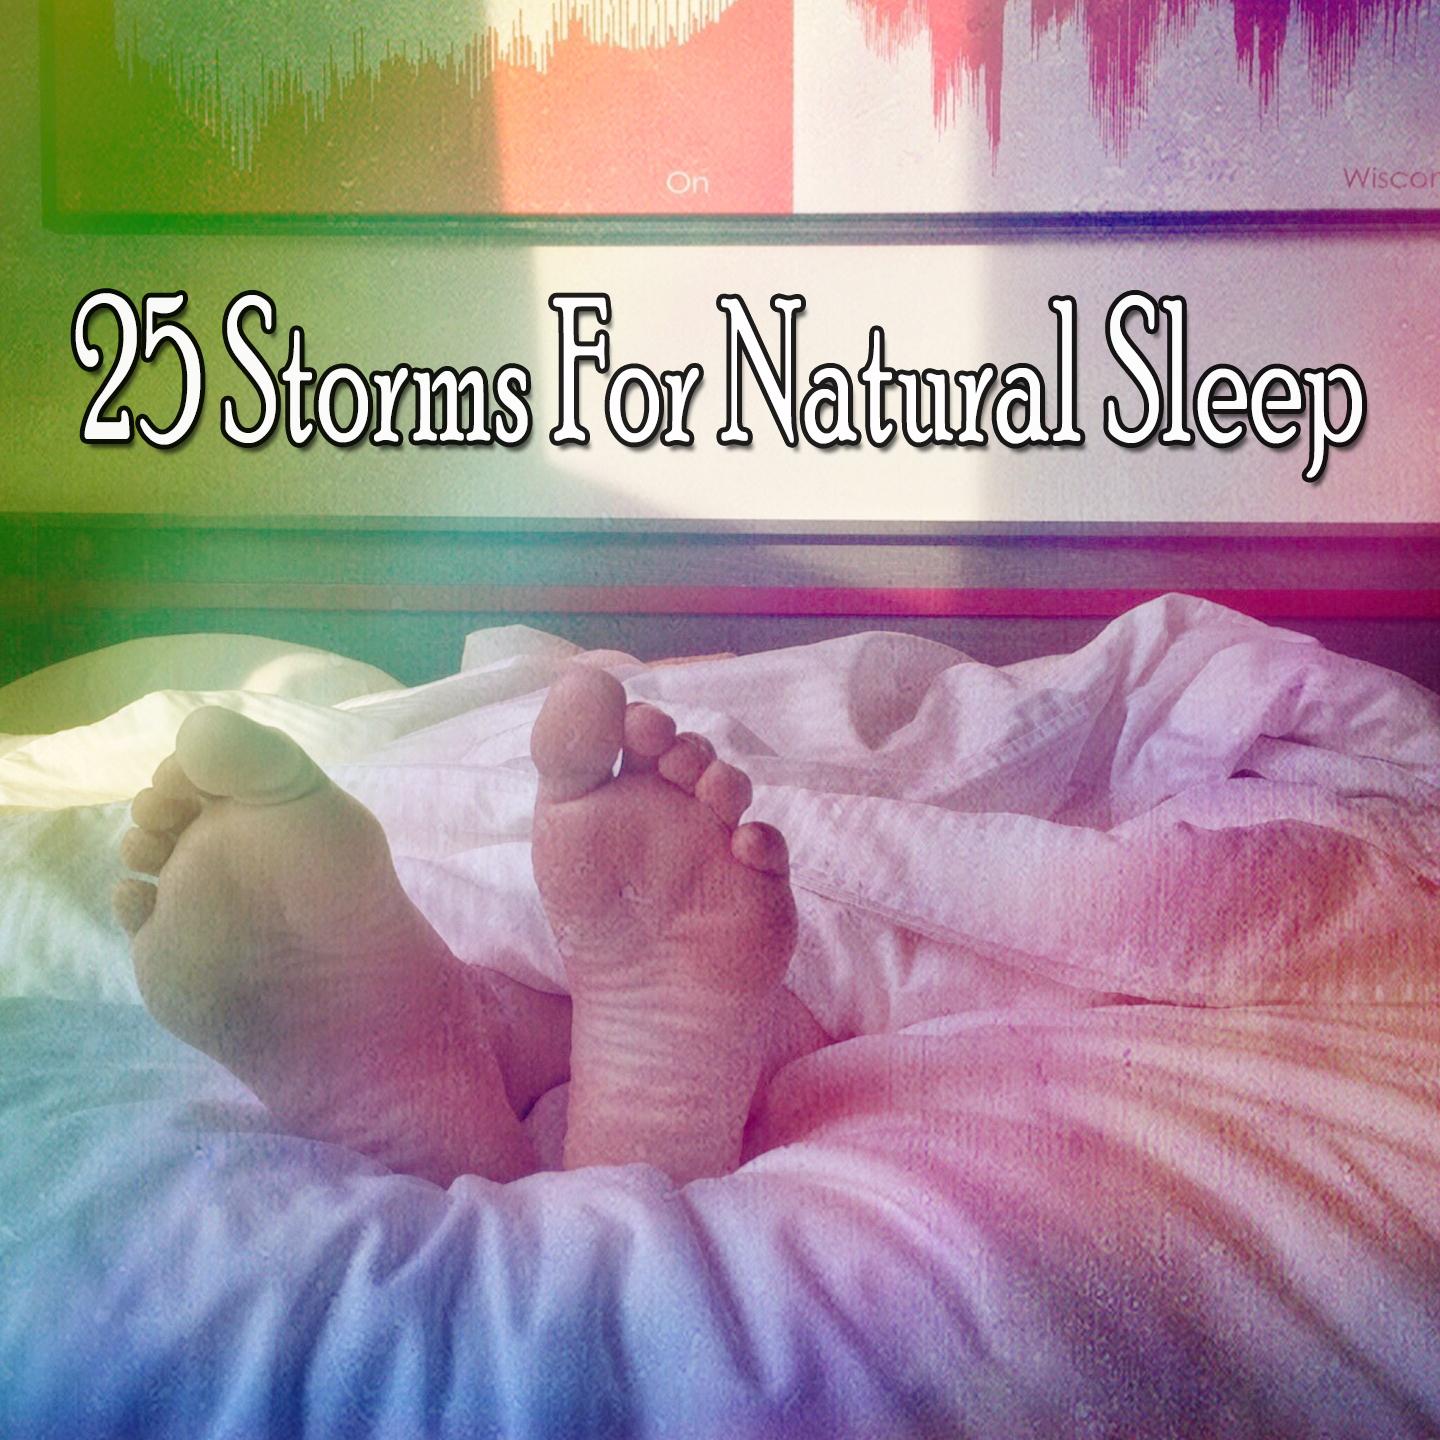 25 Storms For Natural Sleep